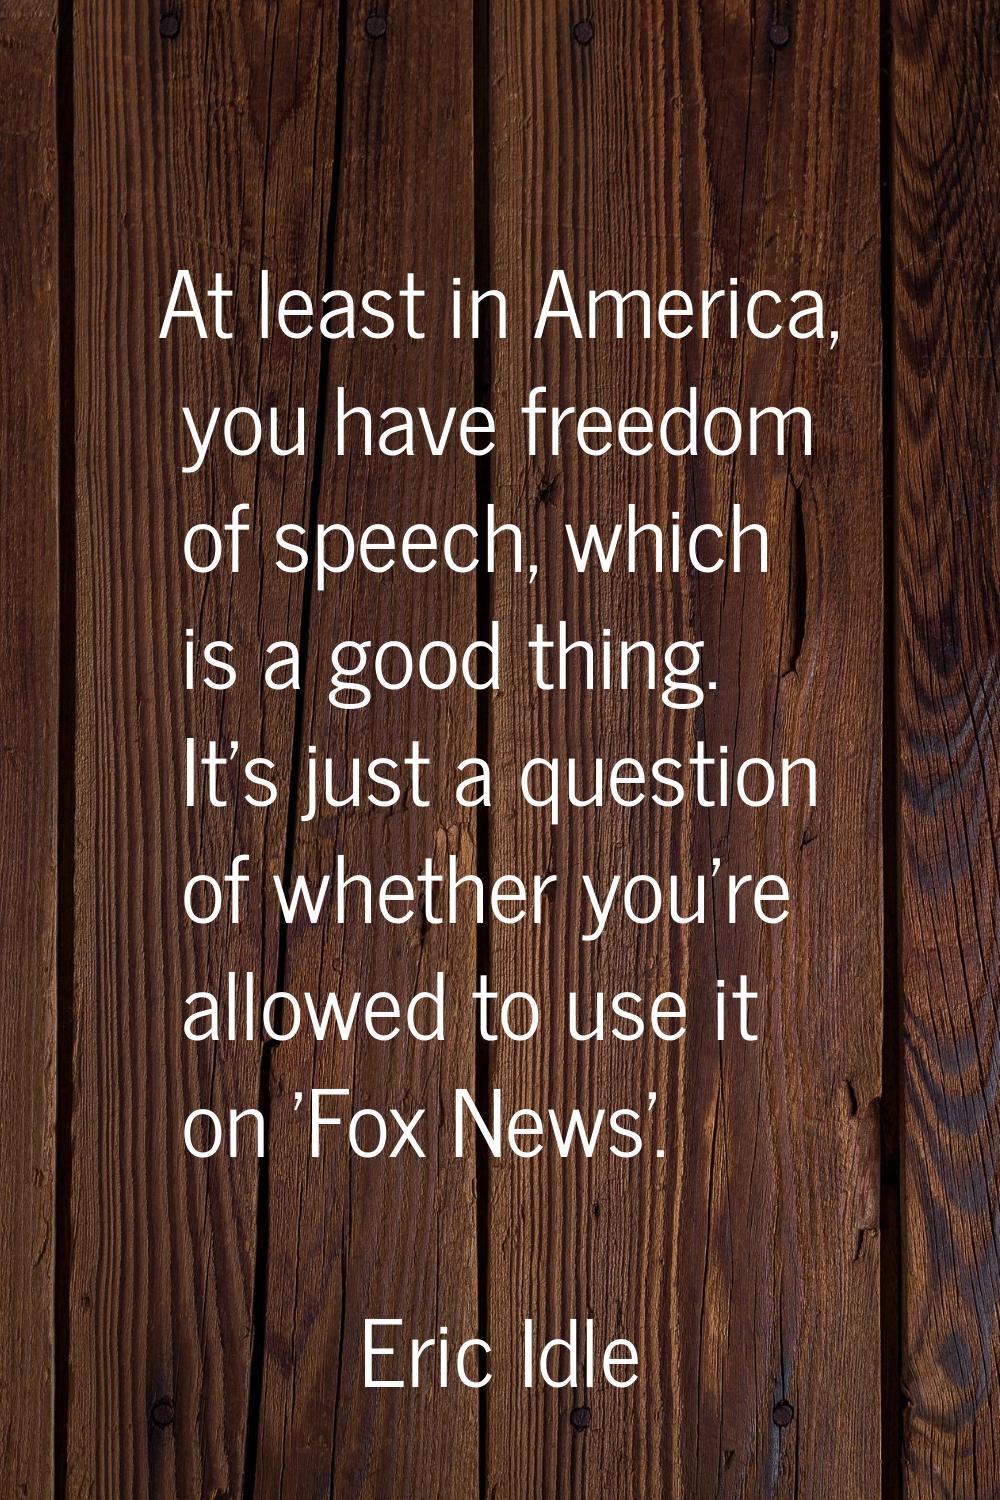 At least in America, you have freedom of speech, which is a good thing. It's just a question of whe